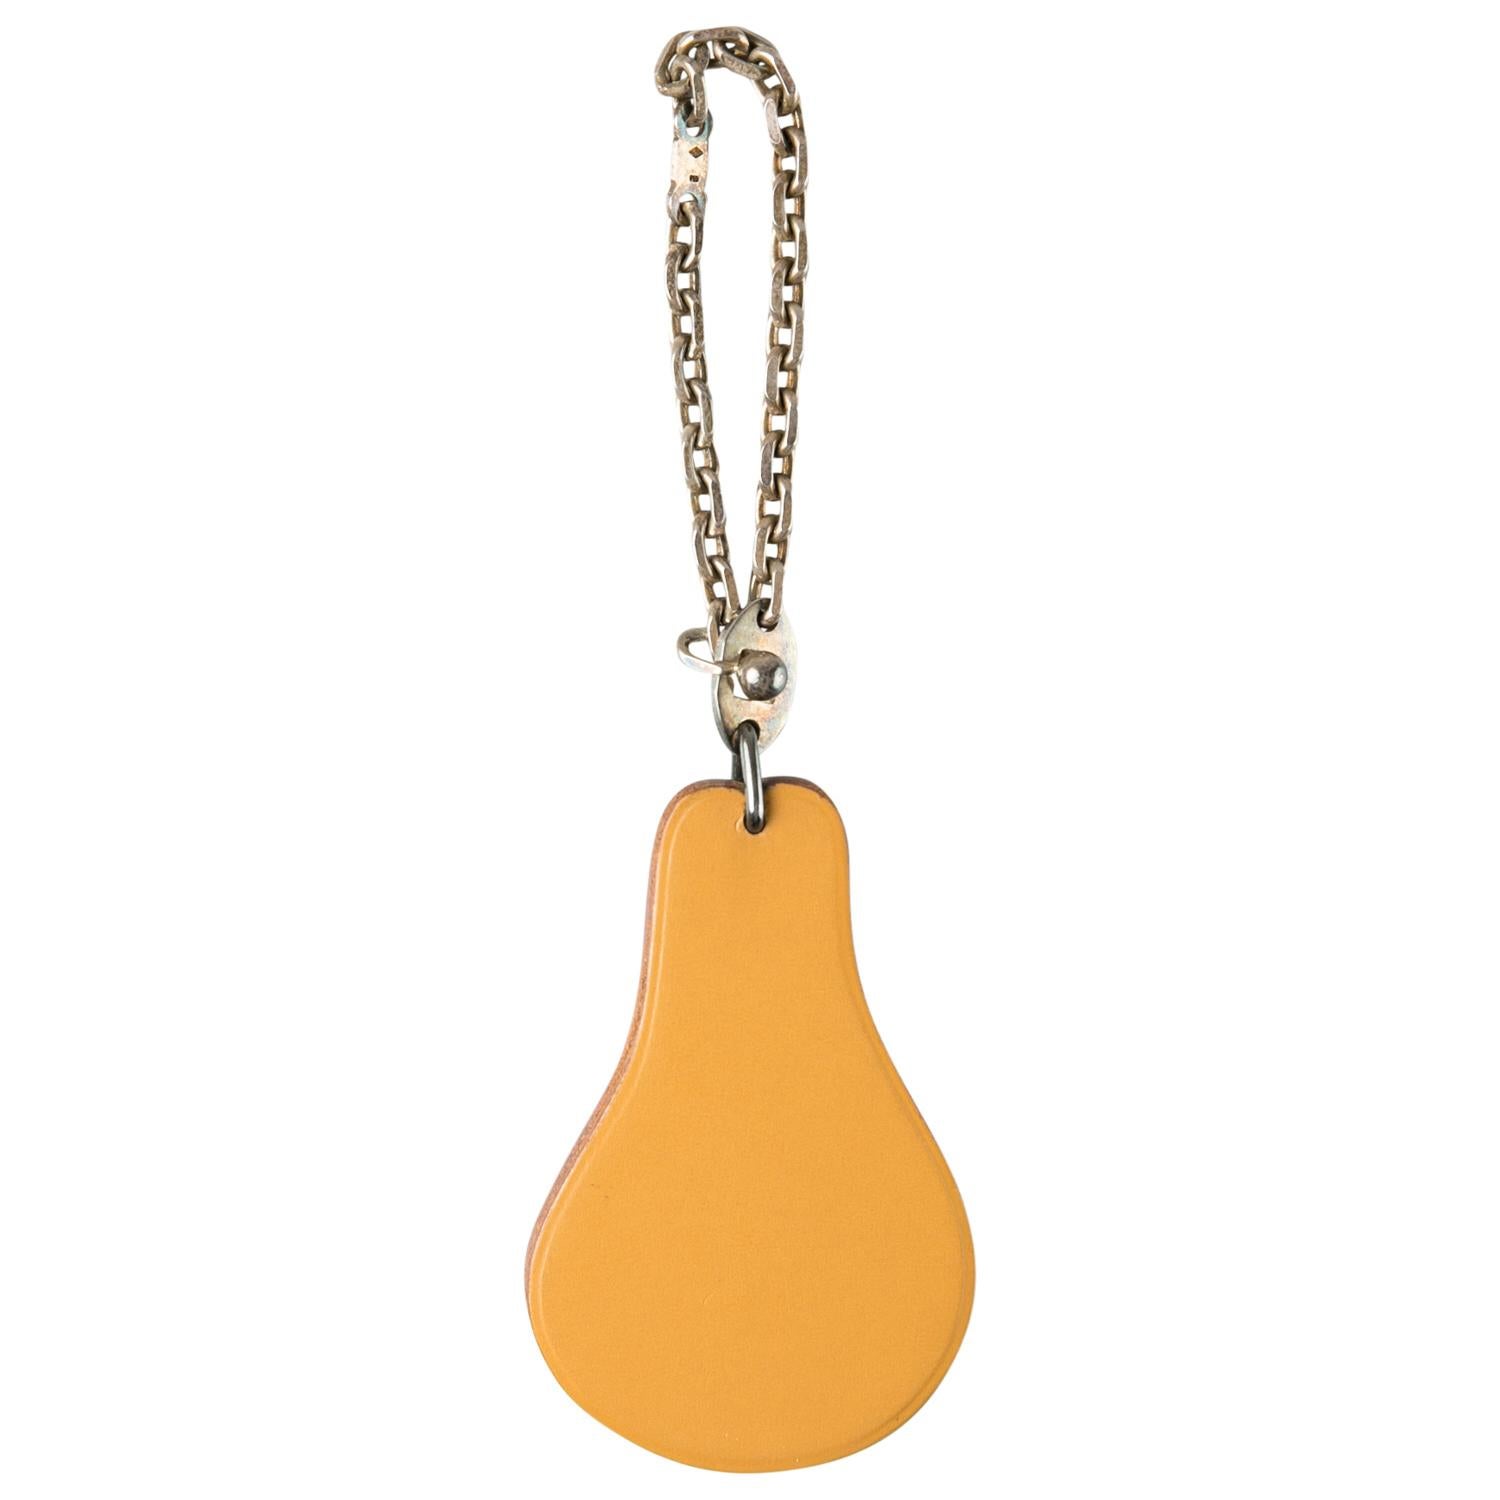 Introduce a fun style to your classic totes with this amazing bag charm from Hermes. Crafted from tan-colored leather into a pear shape, the charm is adorned with a green leaf motif for an ideal replication along with a silver chain attachment and a